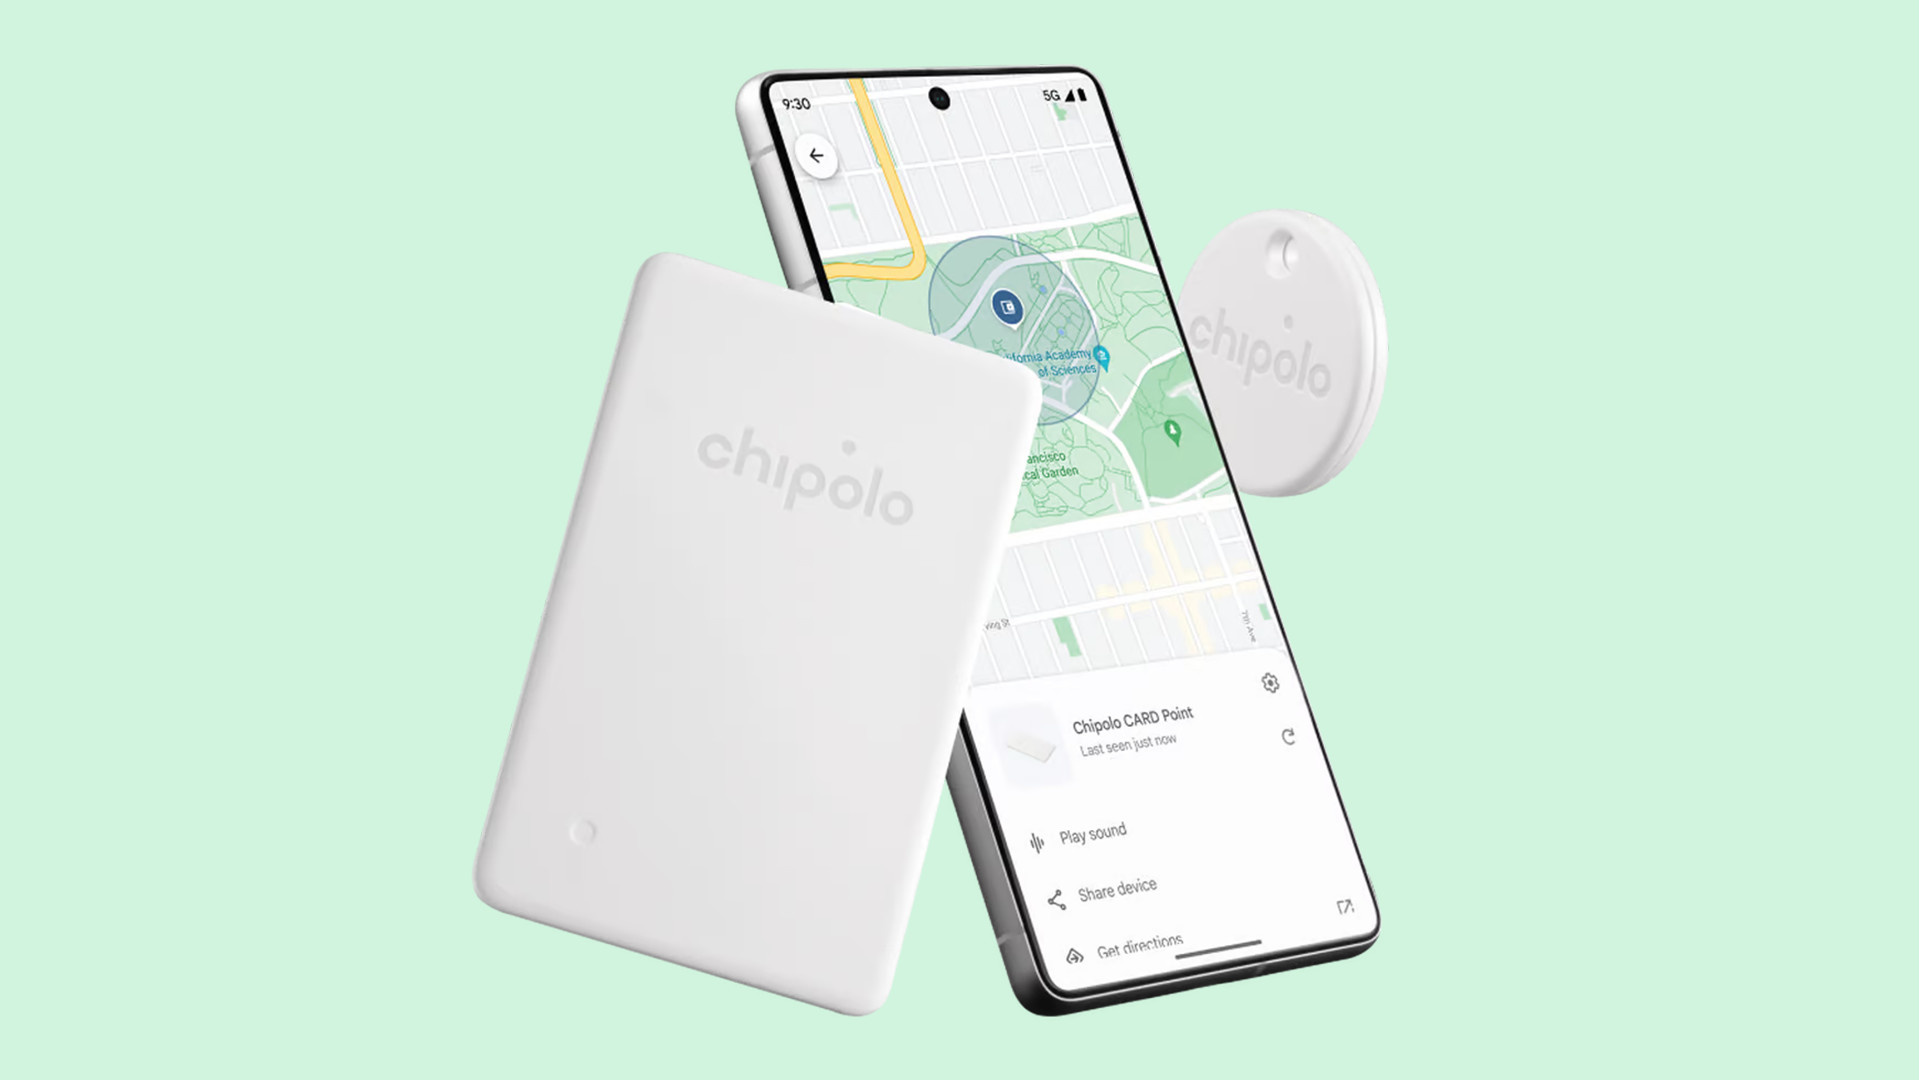 Chipolo's new trackers